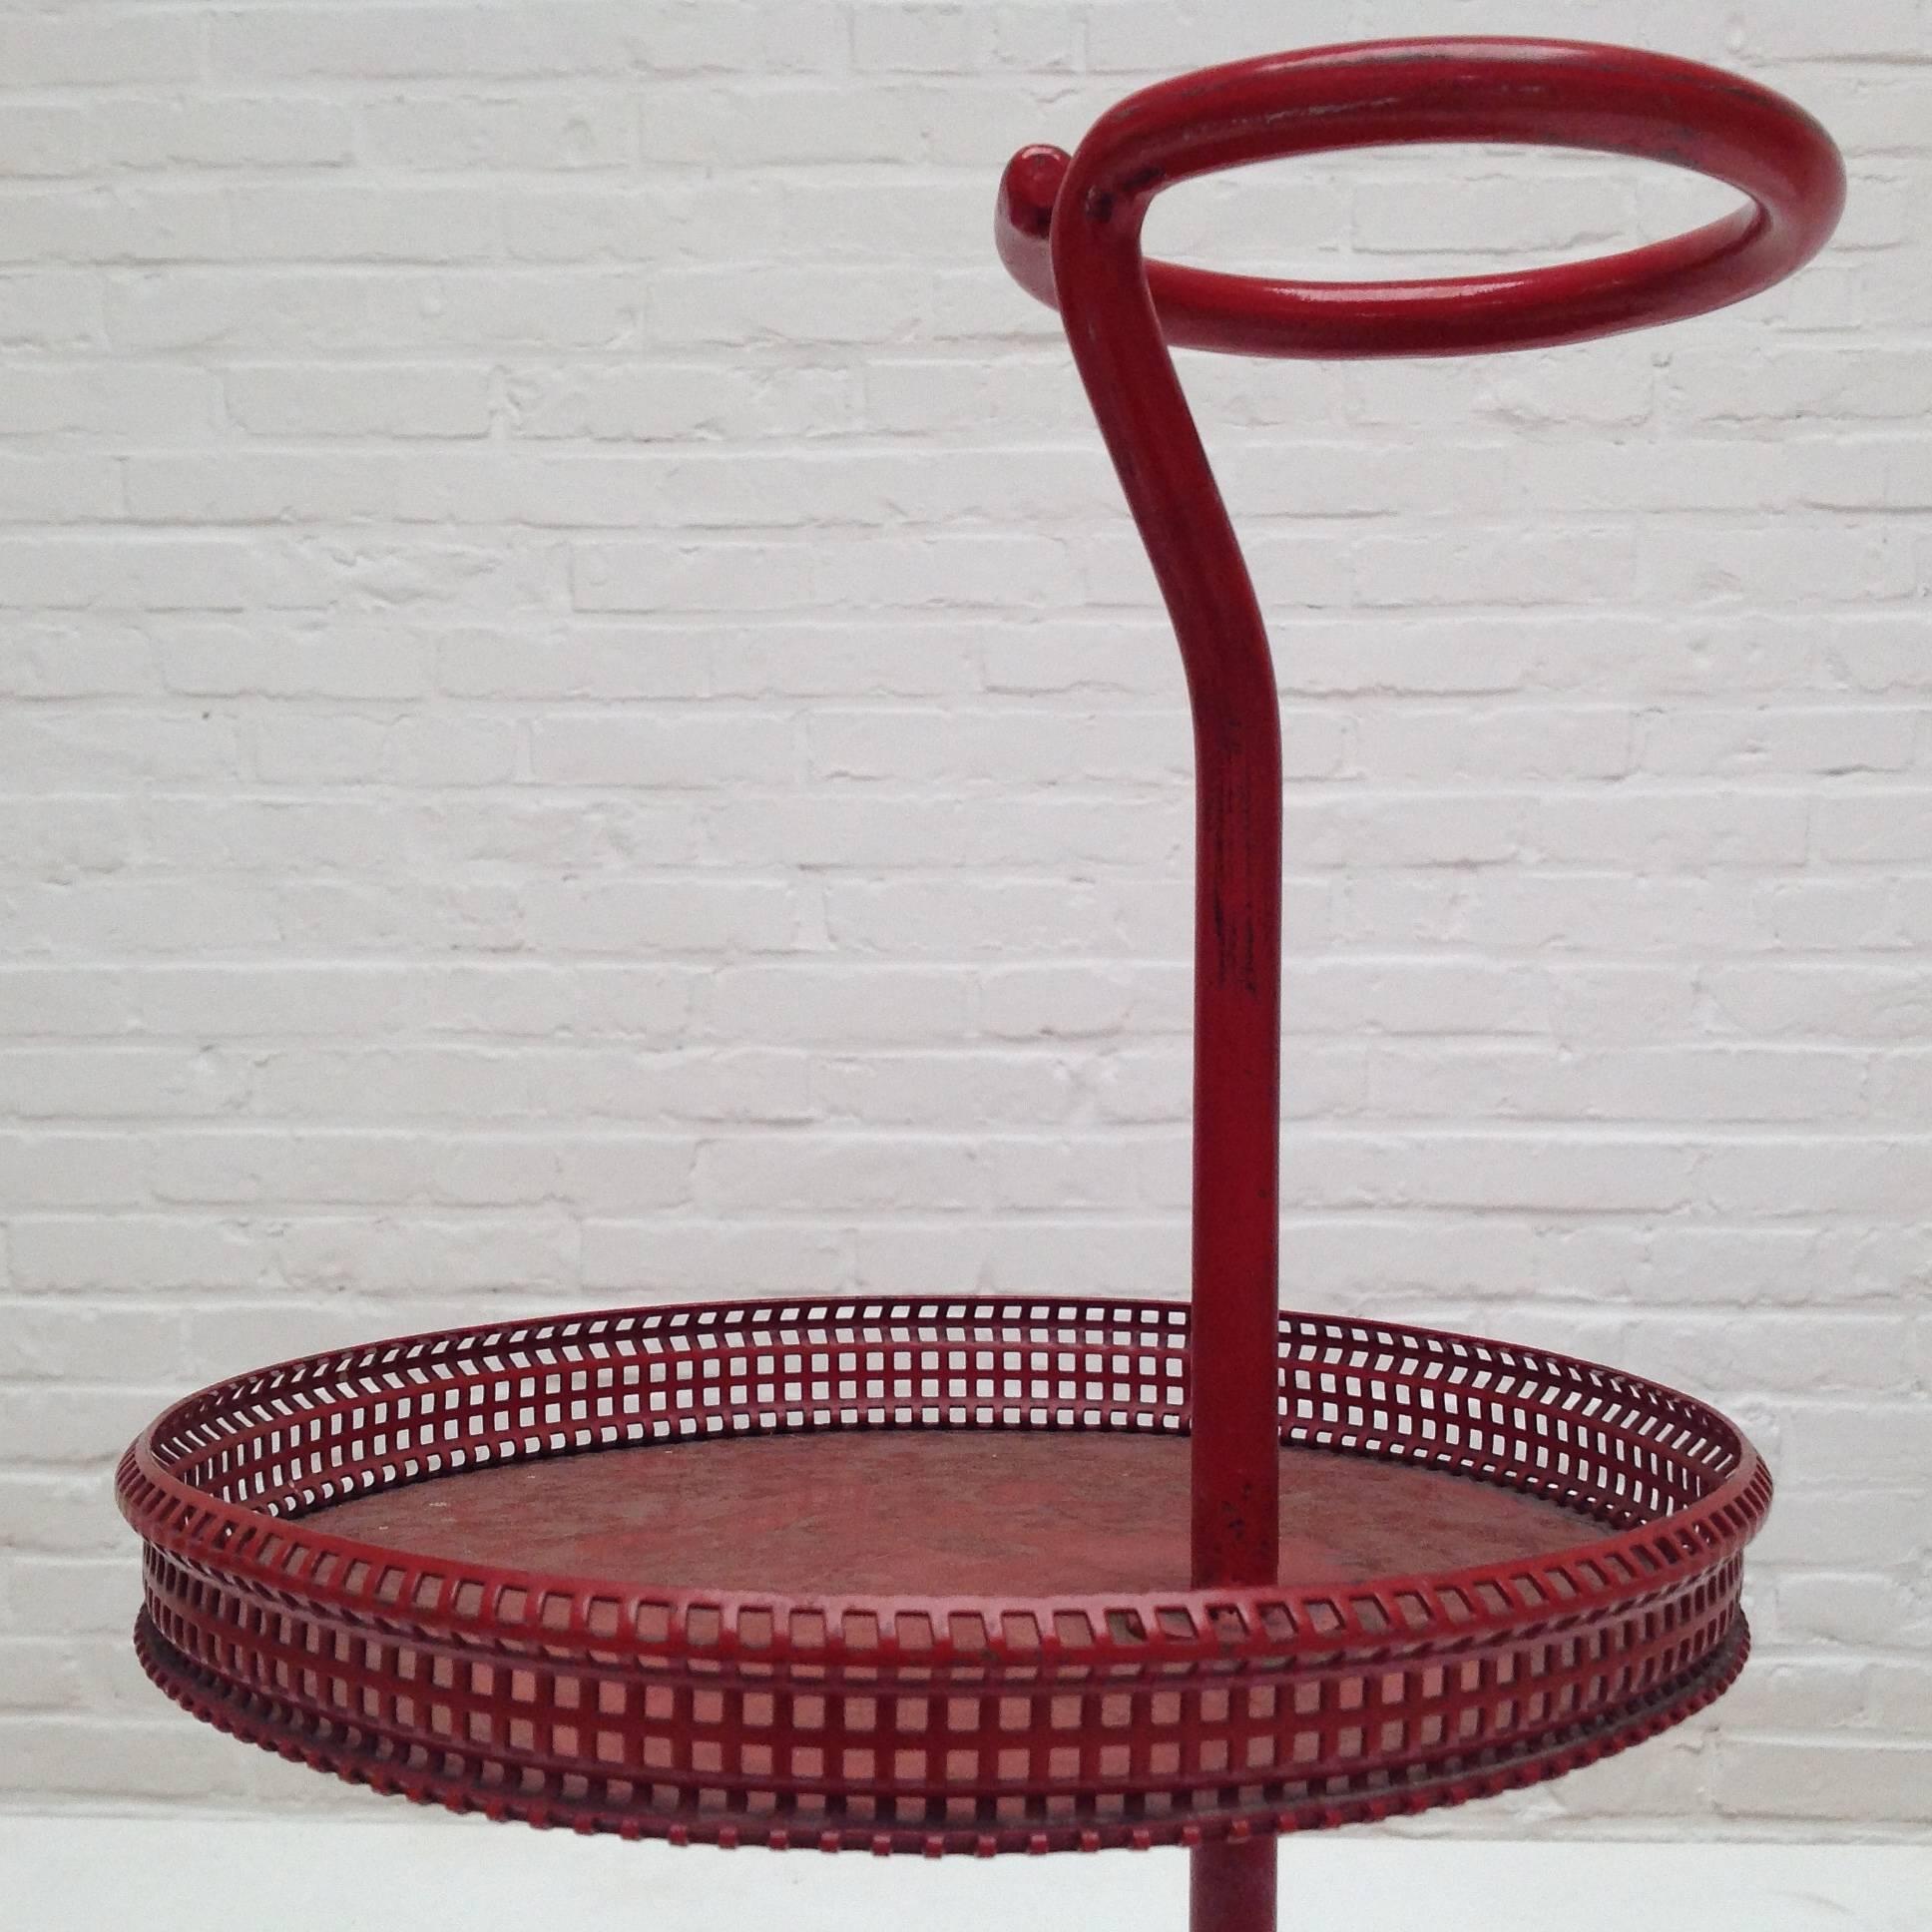 Enameled metal bottle and glass holder designed by Mathieu Matégot.
Manufactured by Ateliers Matégot (France), circa 1950.
Lacquered perforated metal with original wine red paint.
In good original condition, with minor wear consistent with age